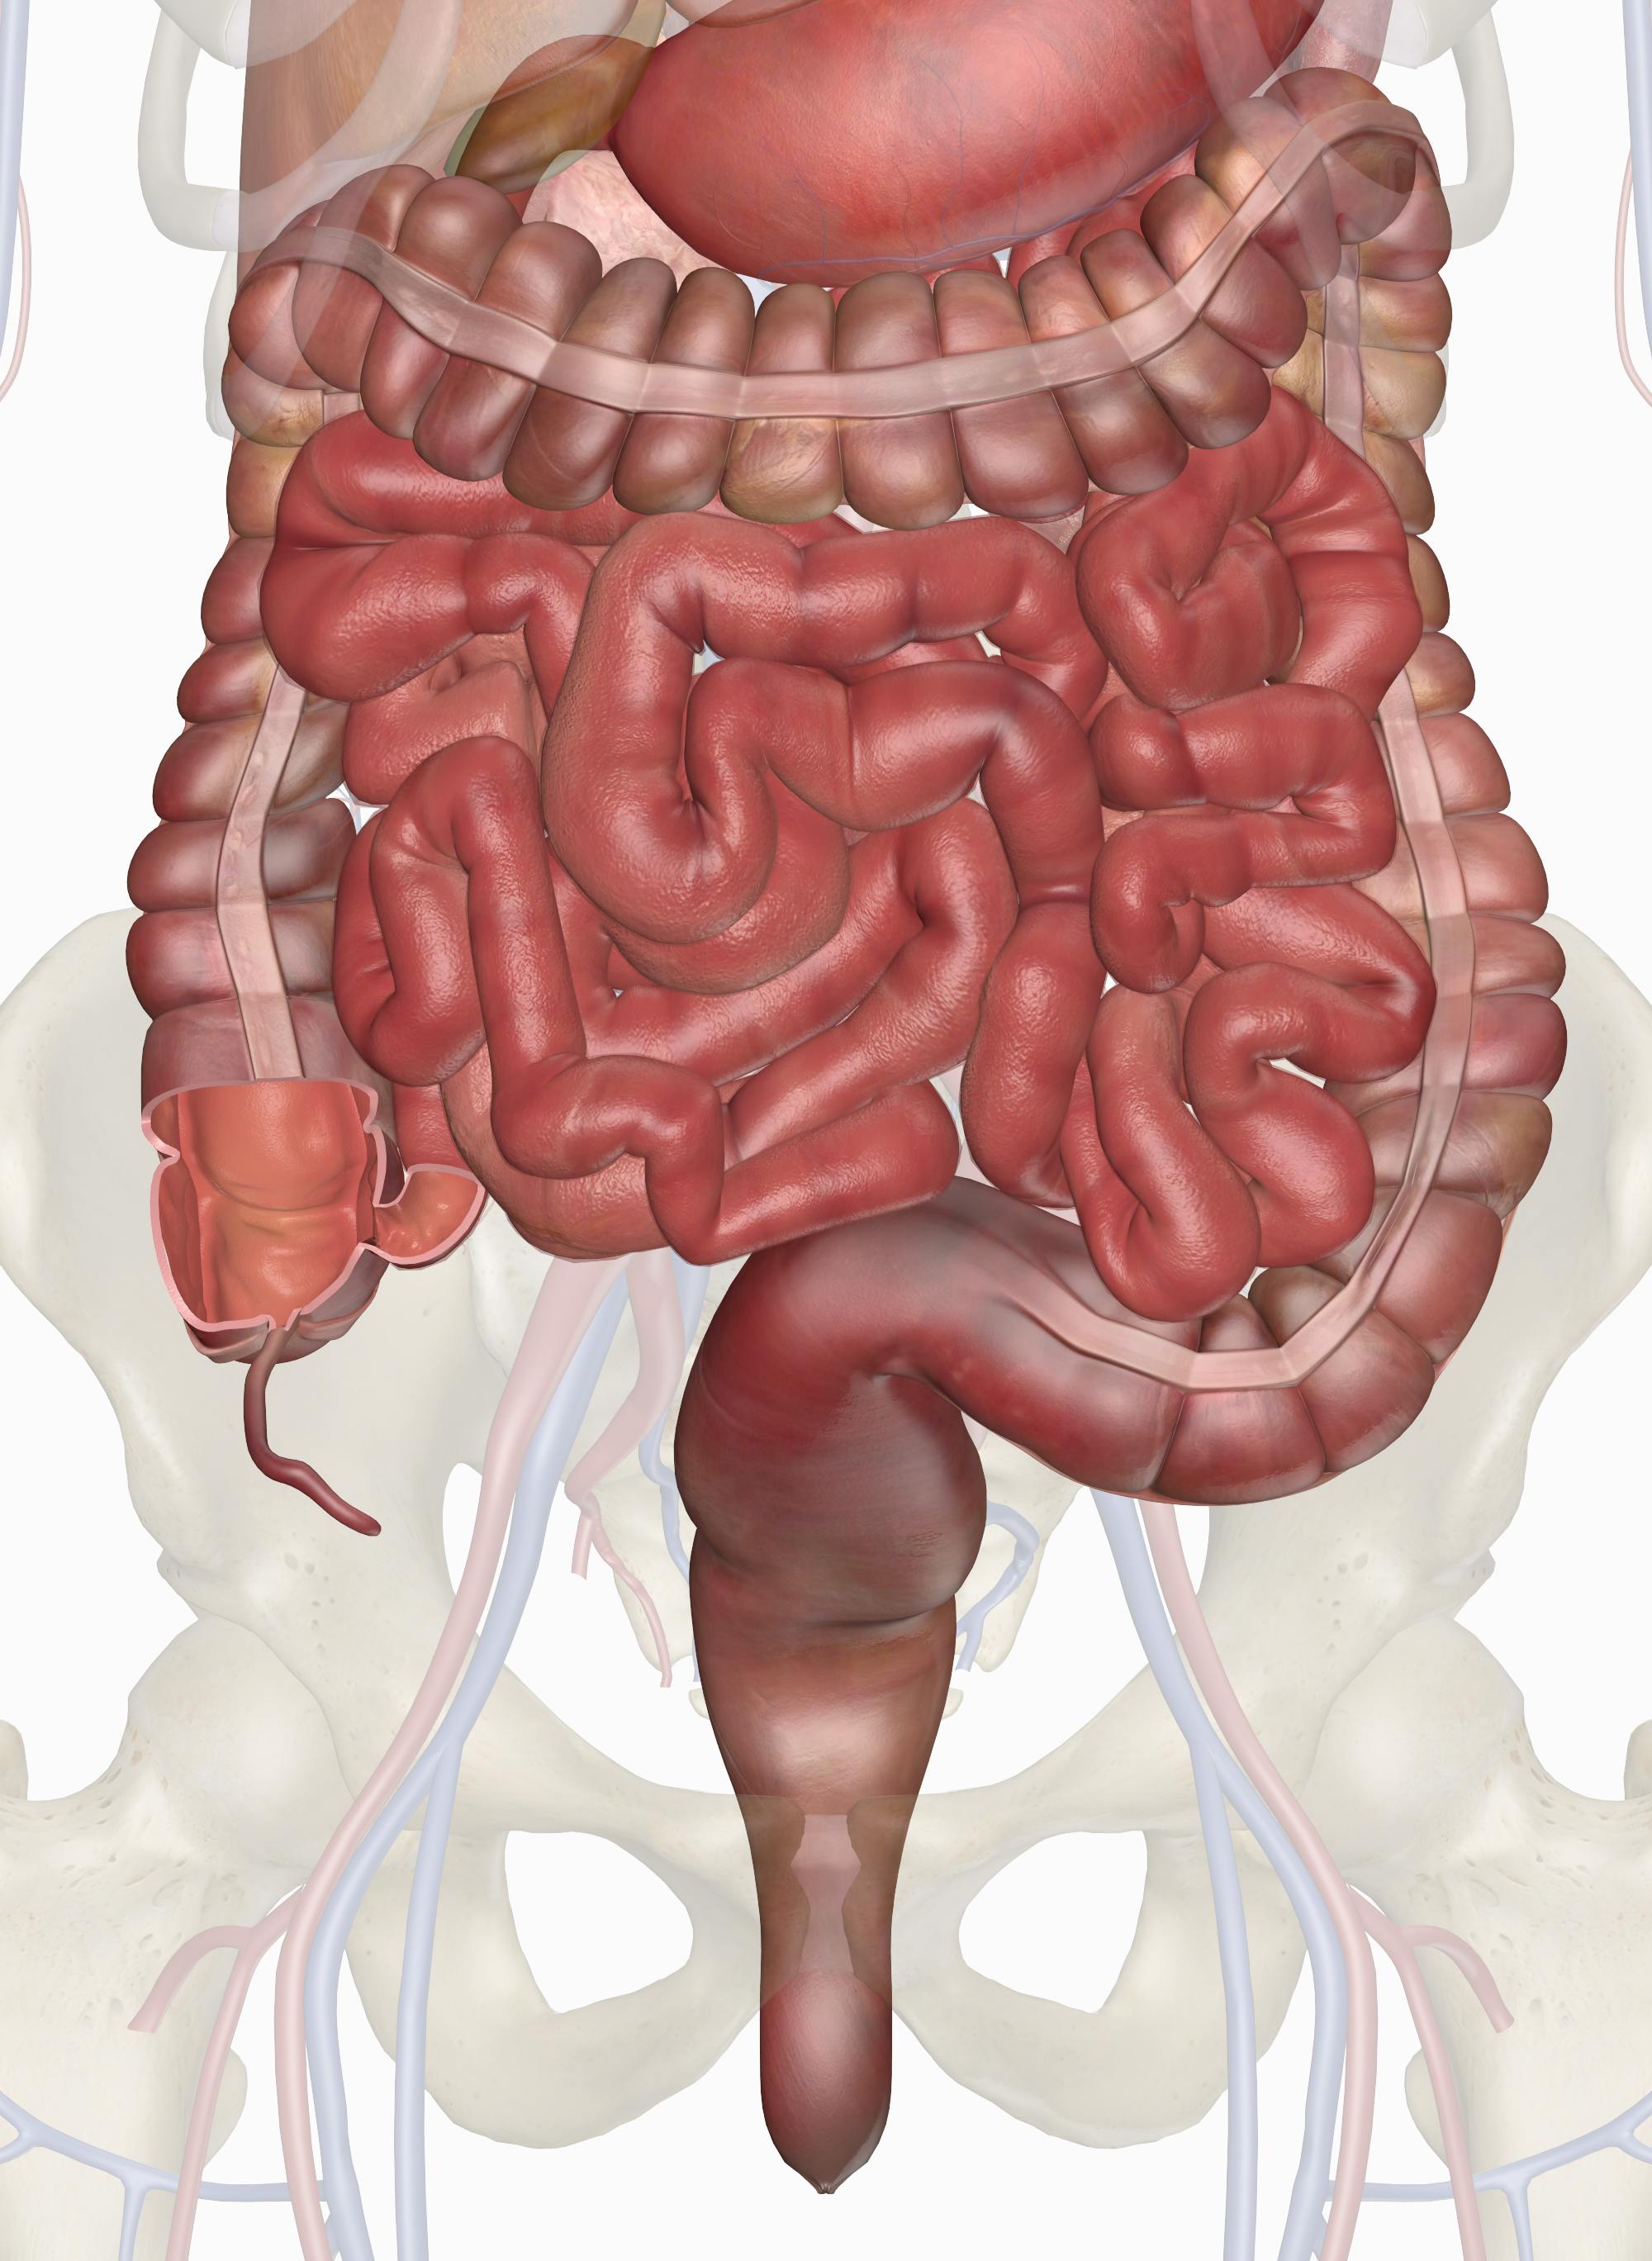 large and small intestine